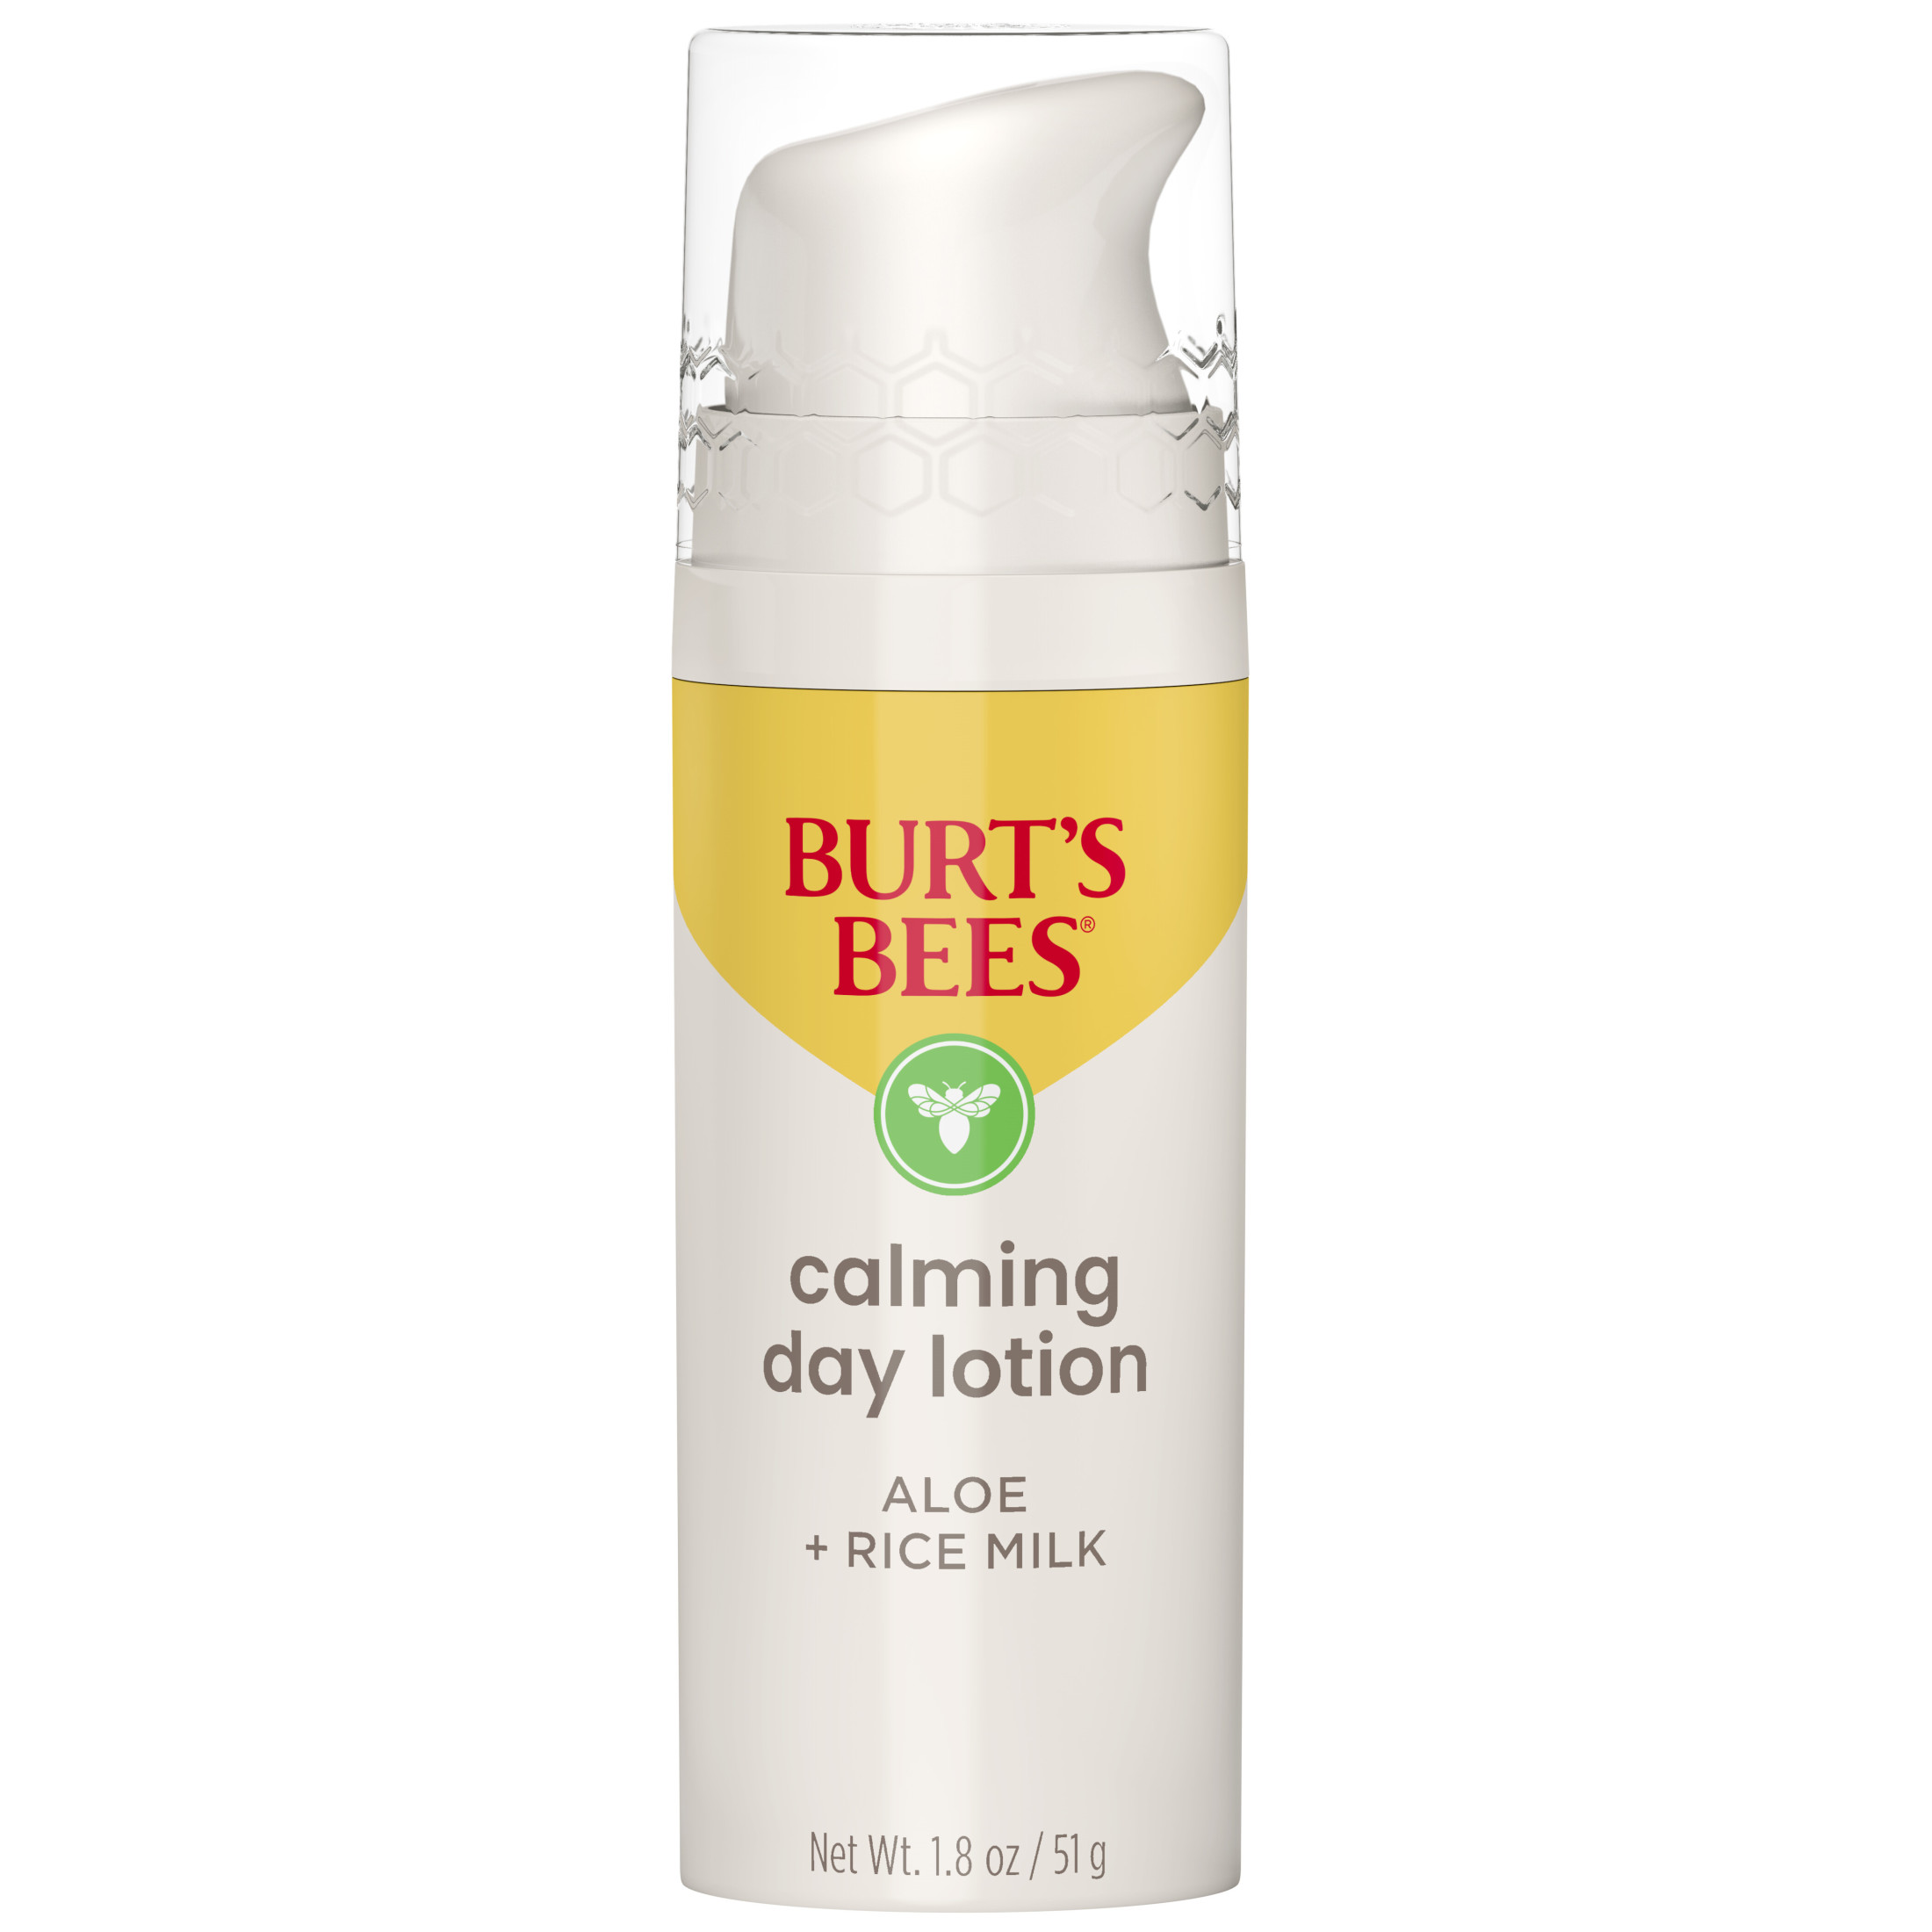 Burt's Bees Calming Day Lotion with Aloe and Rice Milk for Sensitive Skin, 1.8 Fluid Ounces - image 4 of 12